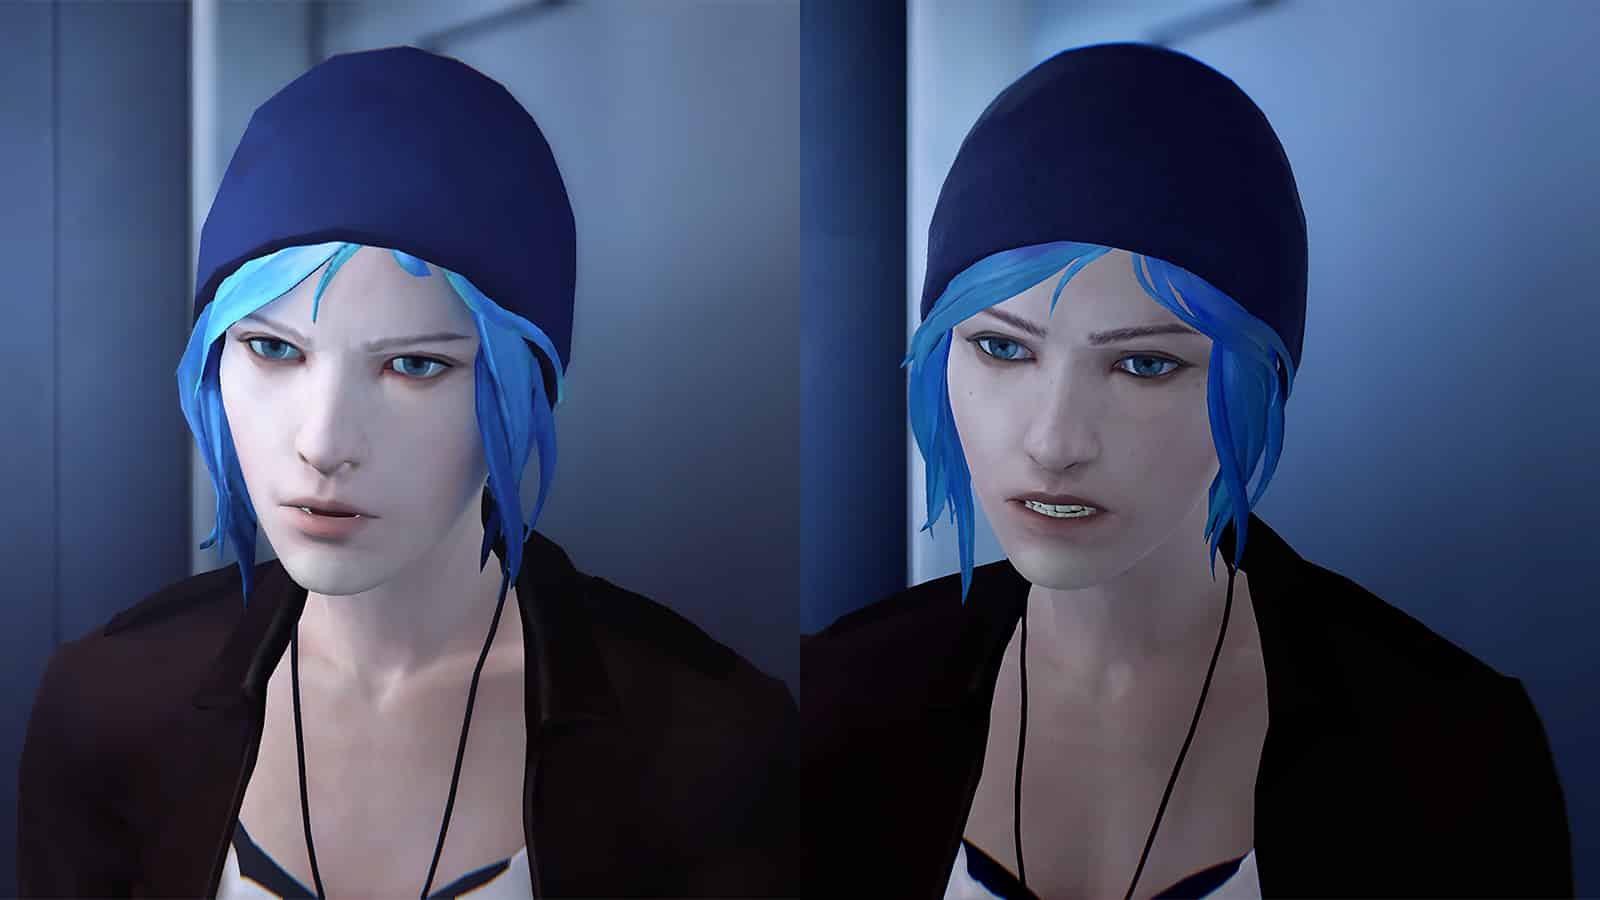 An image of Life is Strange Remastered's graphics, featuring Chloe Price